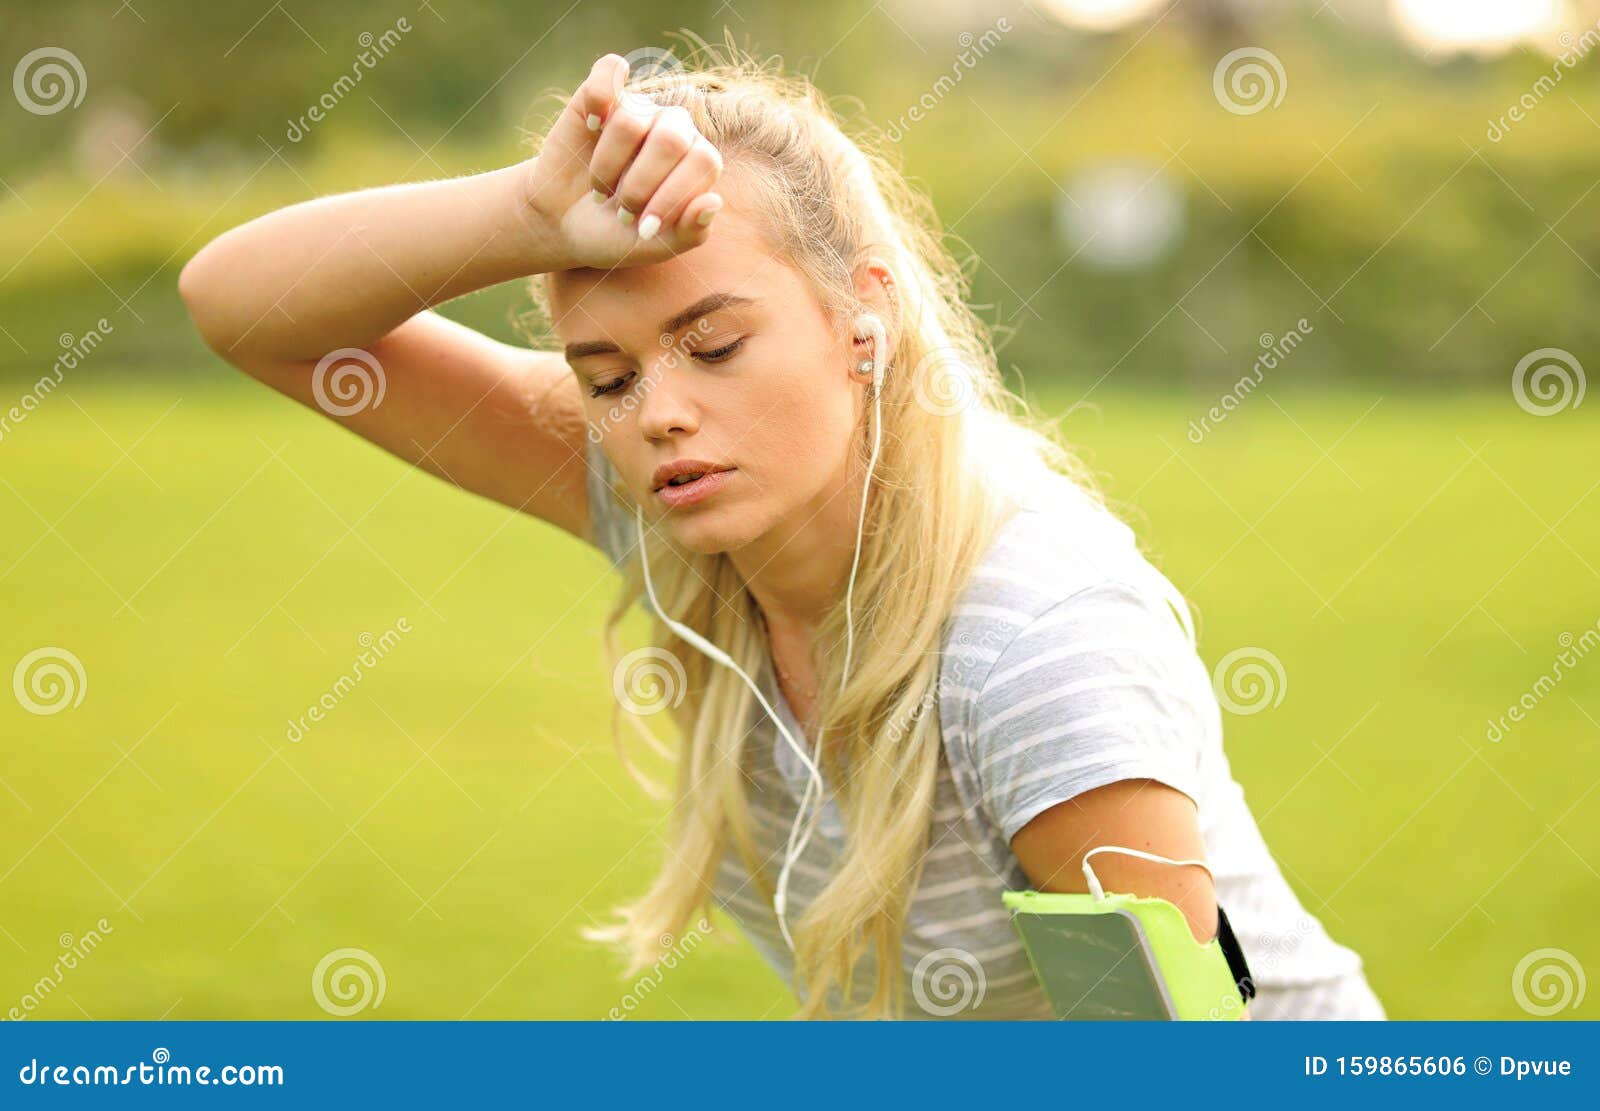 Tired Female Runner In The Park Taking A Break Sporty Woman Breathing And Resting After